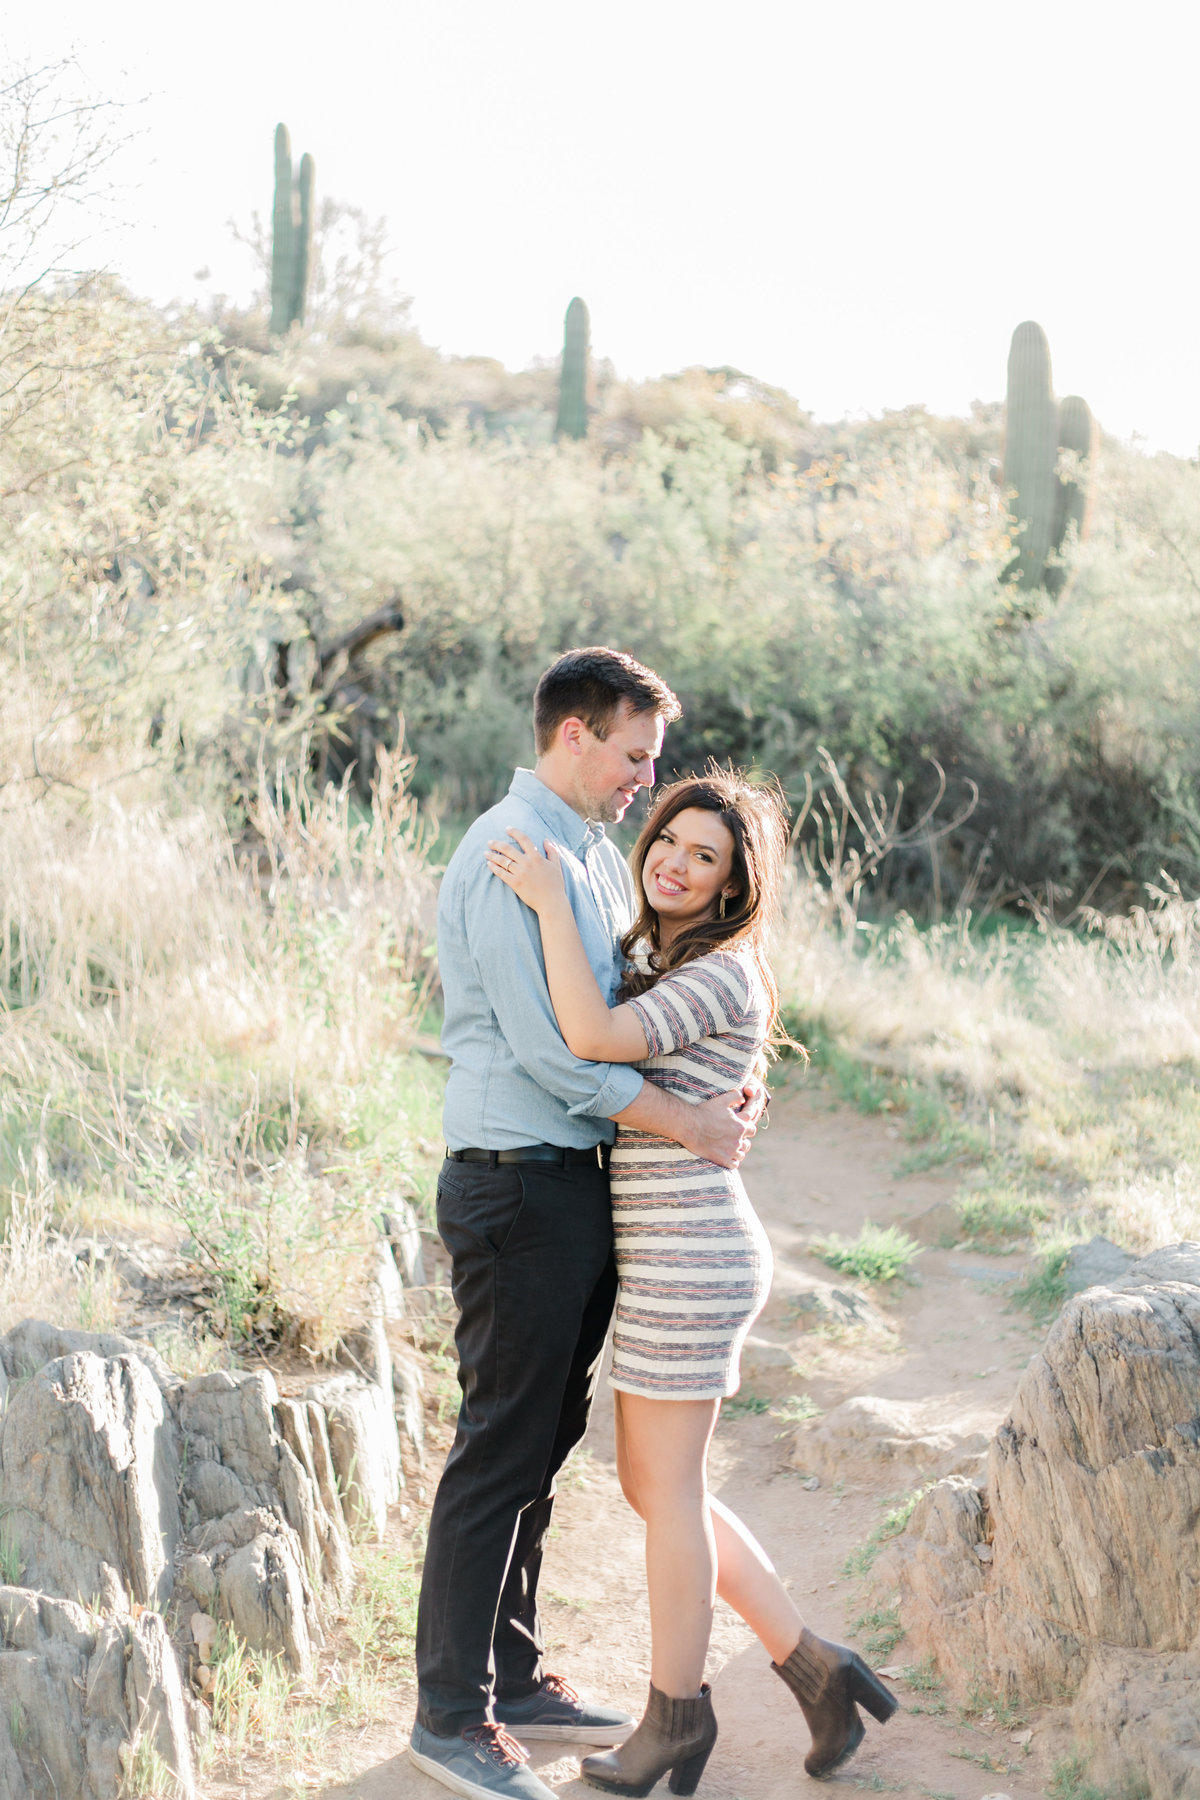 Karlie Colleen Photography - Claire & PJ - Engagement Session-193